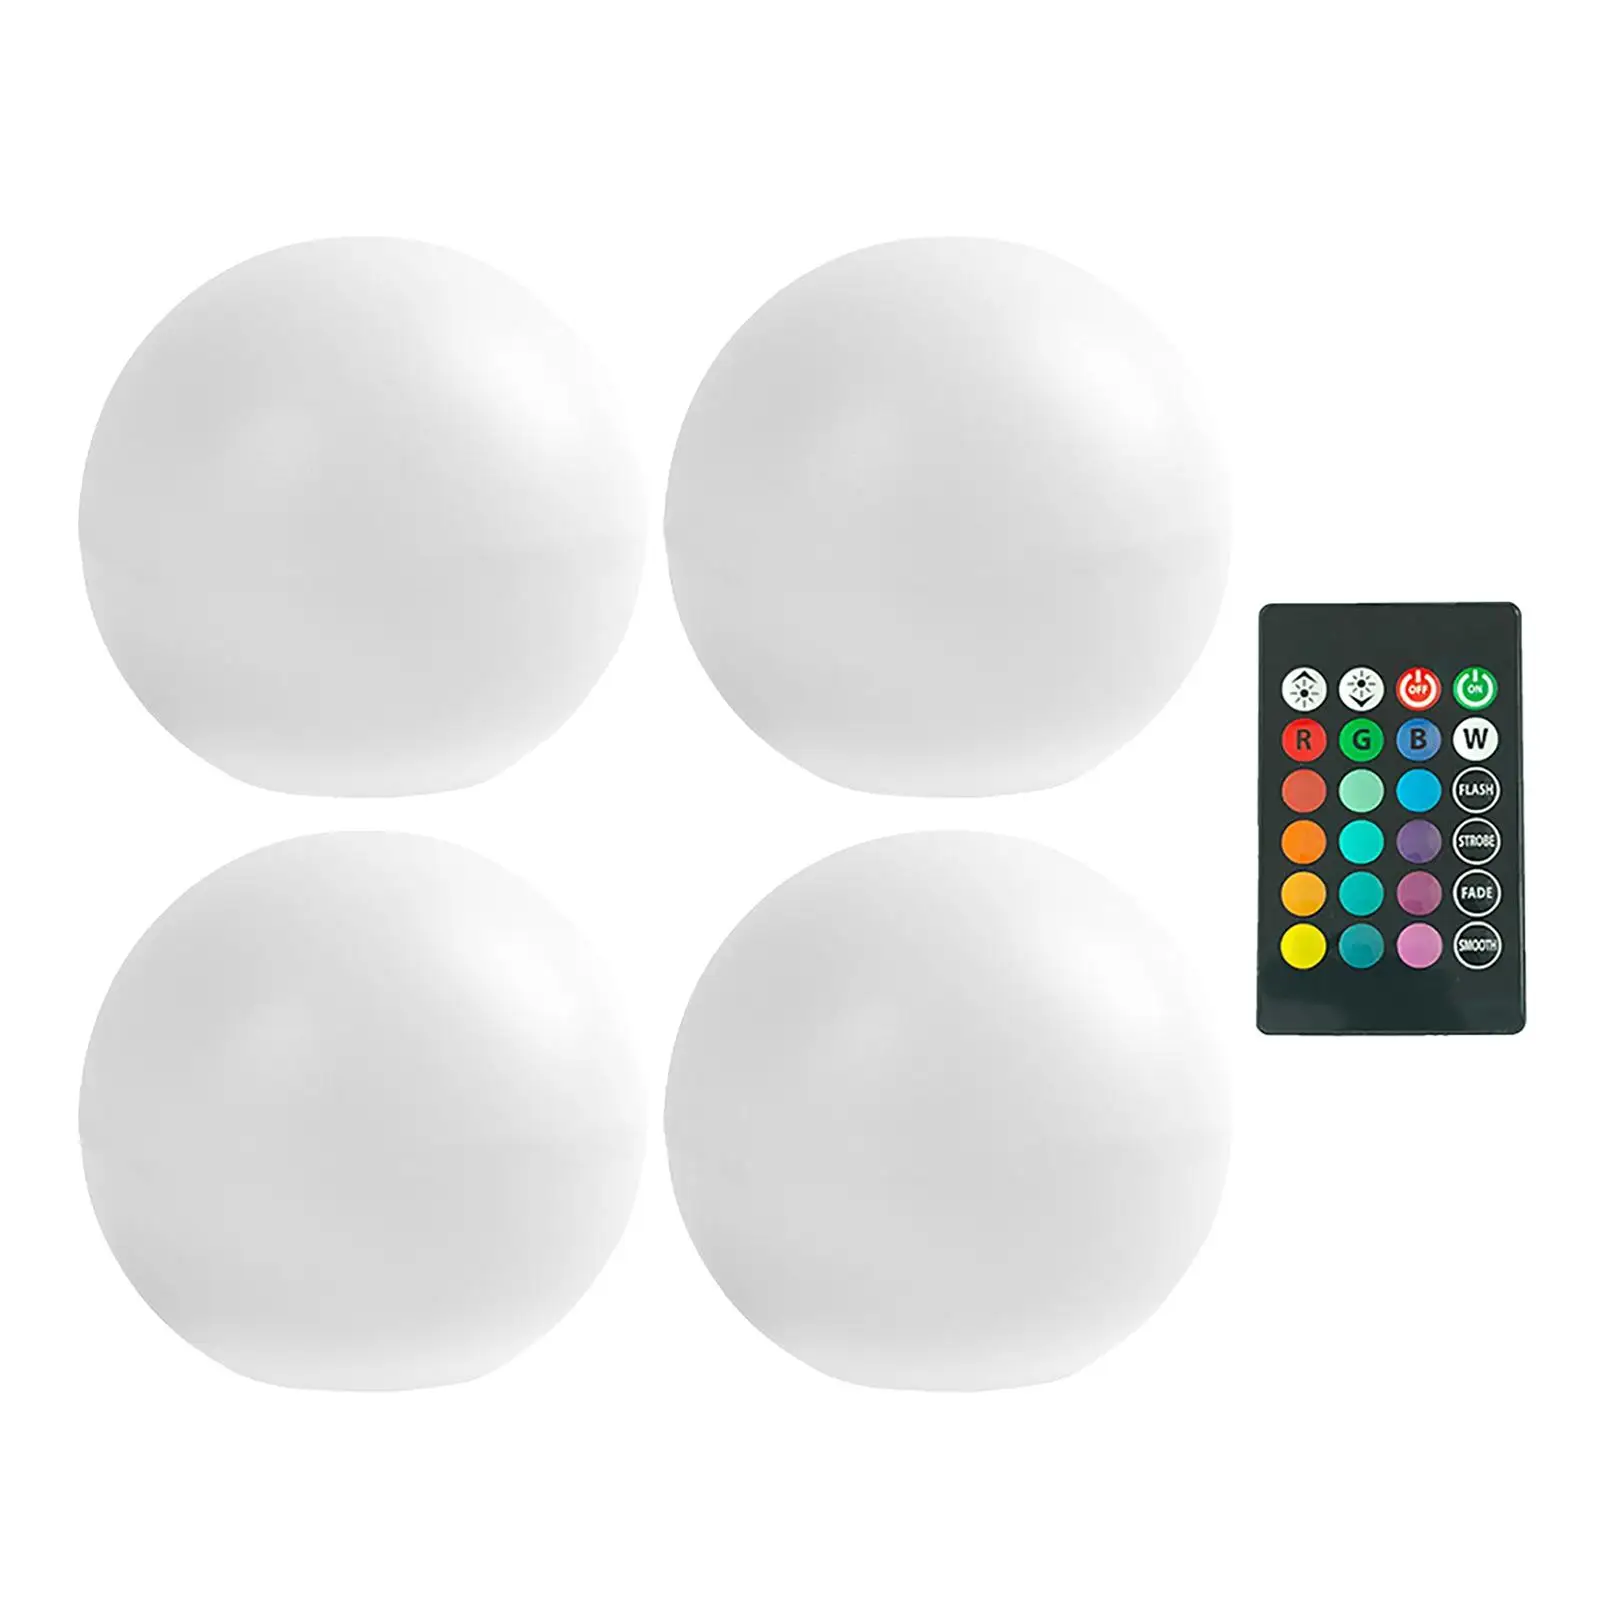 Waterproof Pool Ball Light Glowing Ball LED Colorful Pool Lamp Floating Pool Lights for Party Patio Backyard Lawn Decor